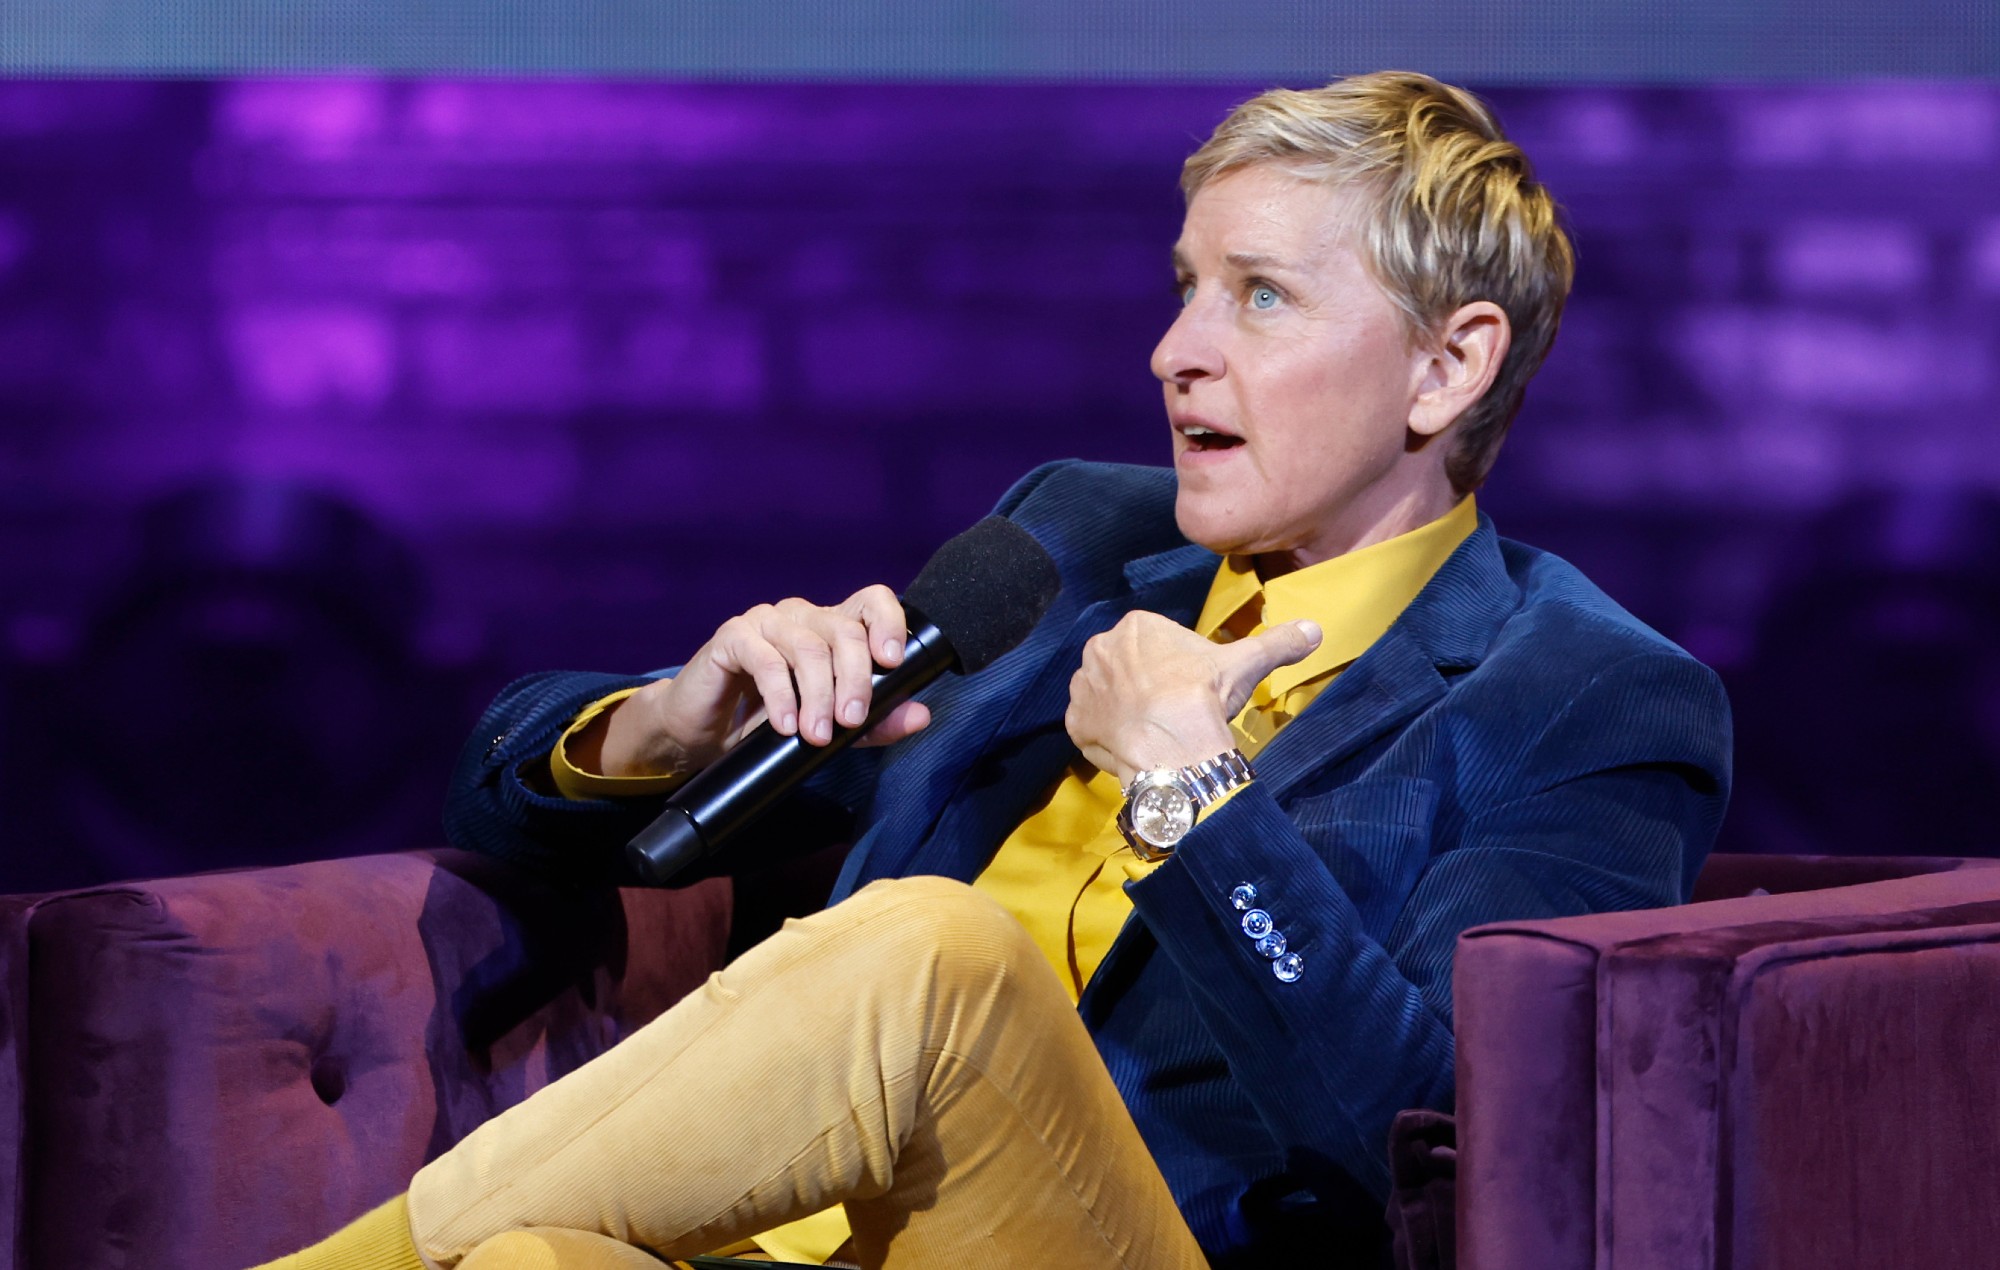 Ellen DeGeneres on her talk show ending: “This is not the way I wanted my career to end”